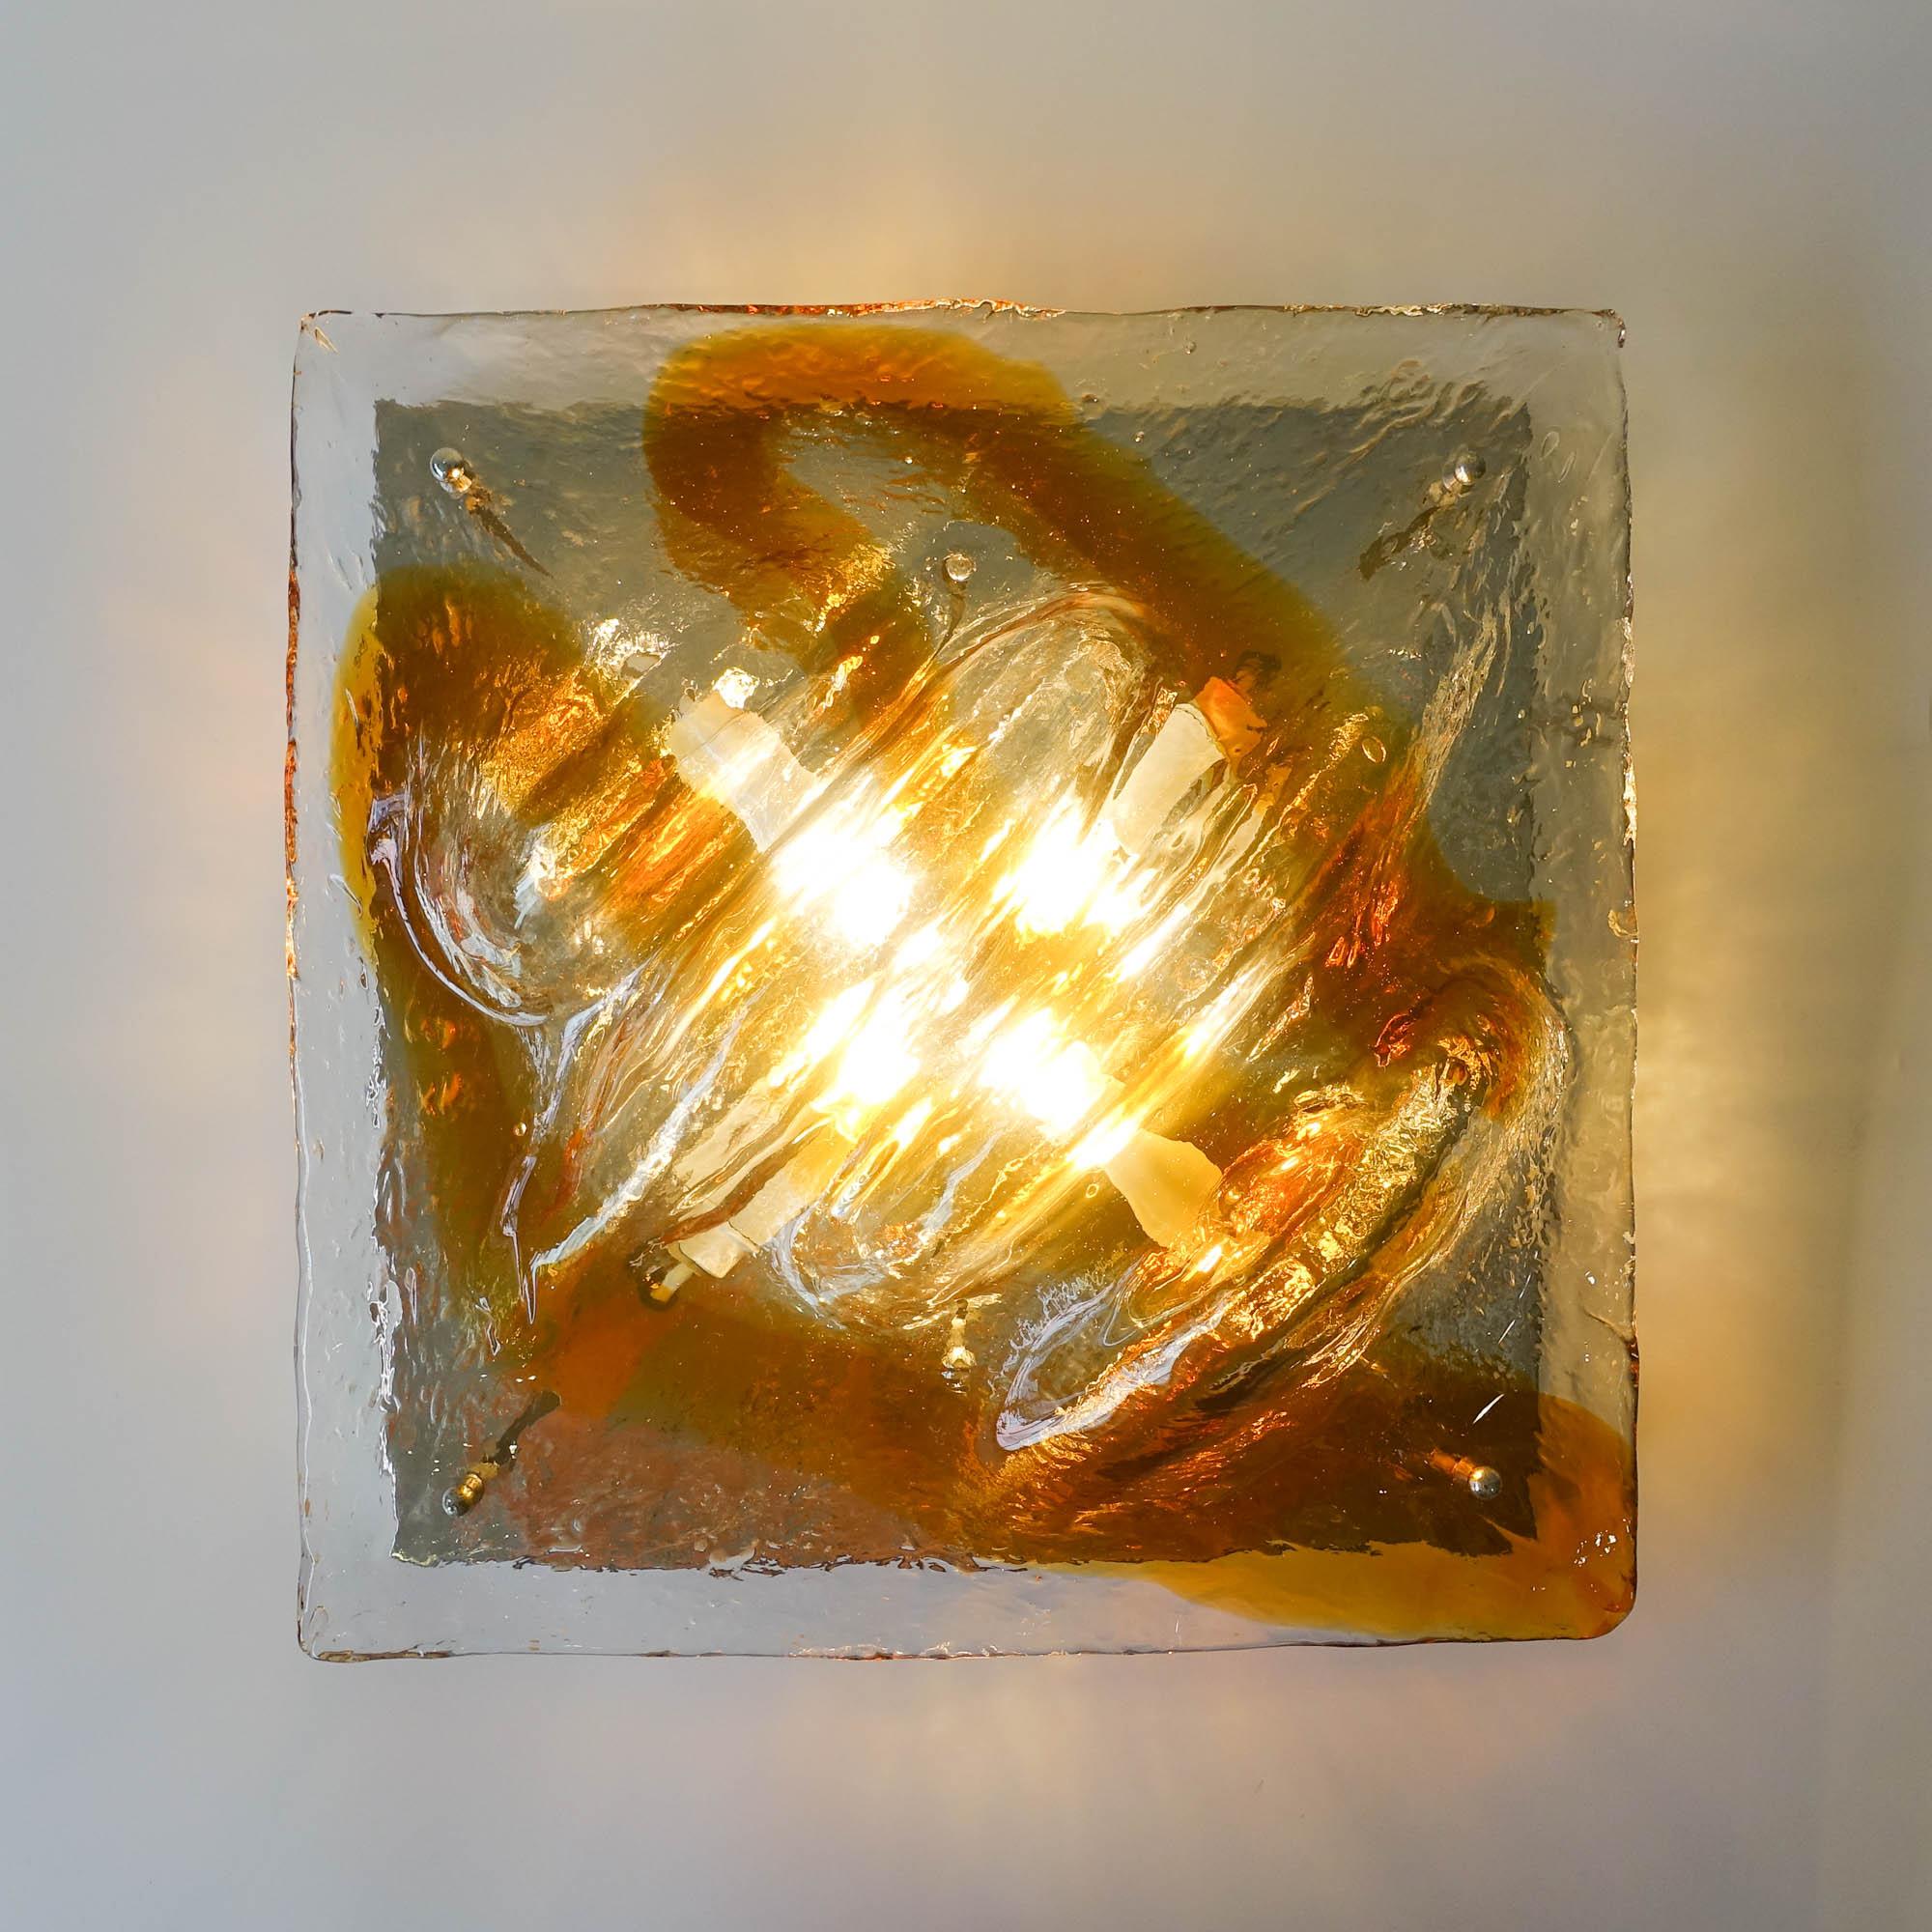 This sconce was designed and produced by Mazzega in Italy, during the 1960's. It has a thick wavy amber and clear Murano glass mounted on a chrome wall plate. It is a solid hand-blown Murano glass with some curves that gives an almost tridimensional